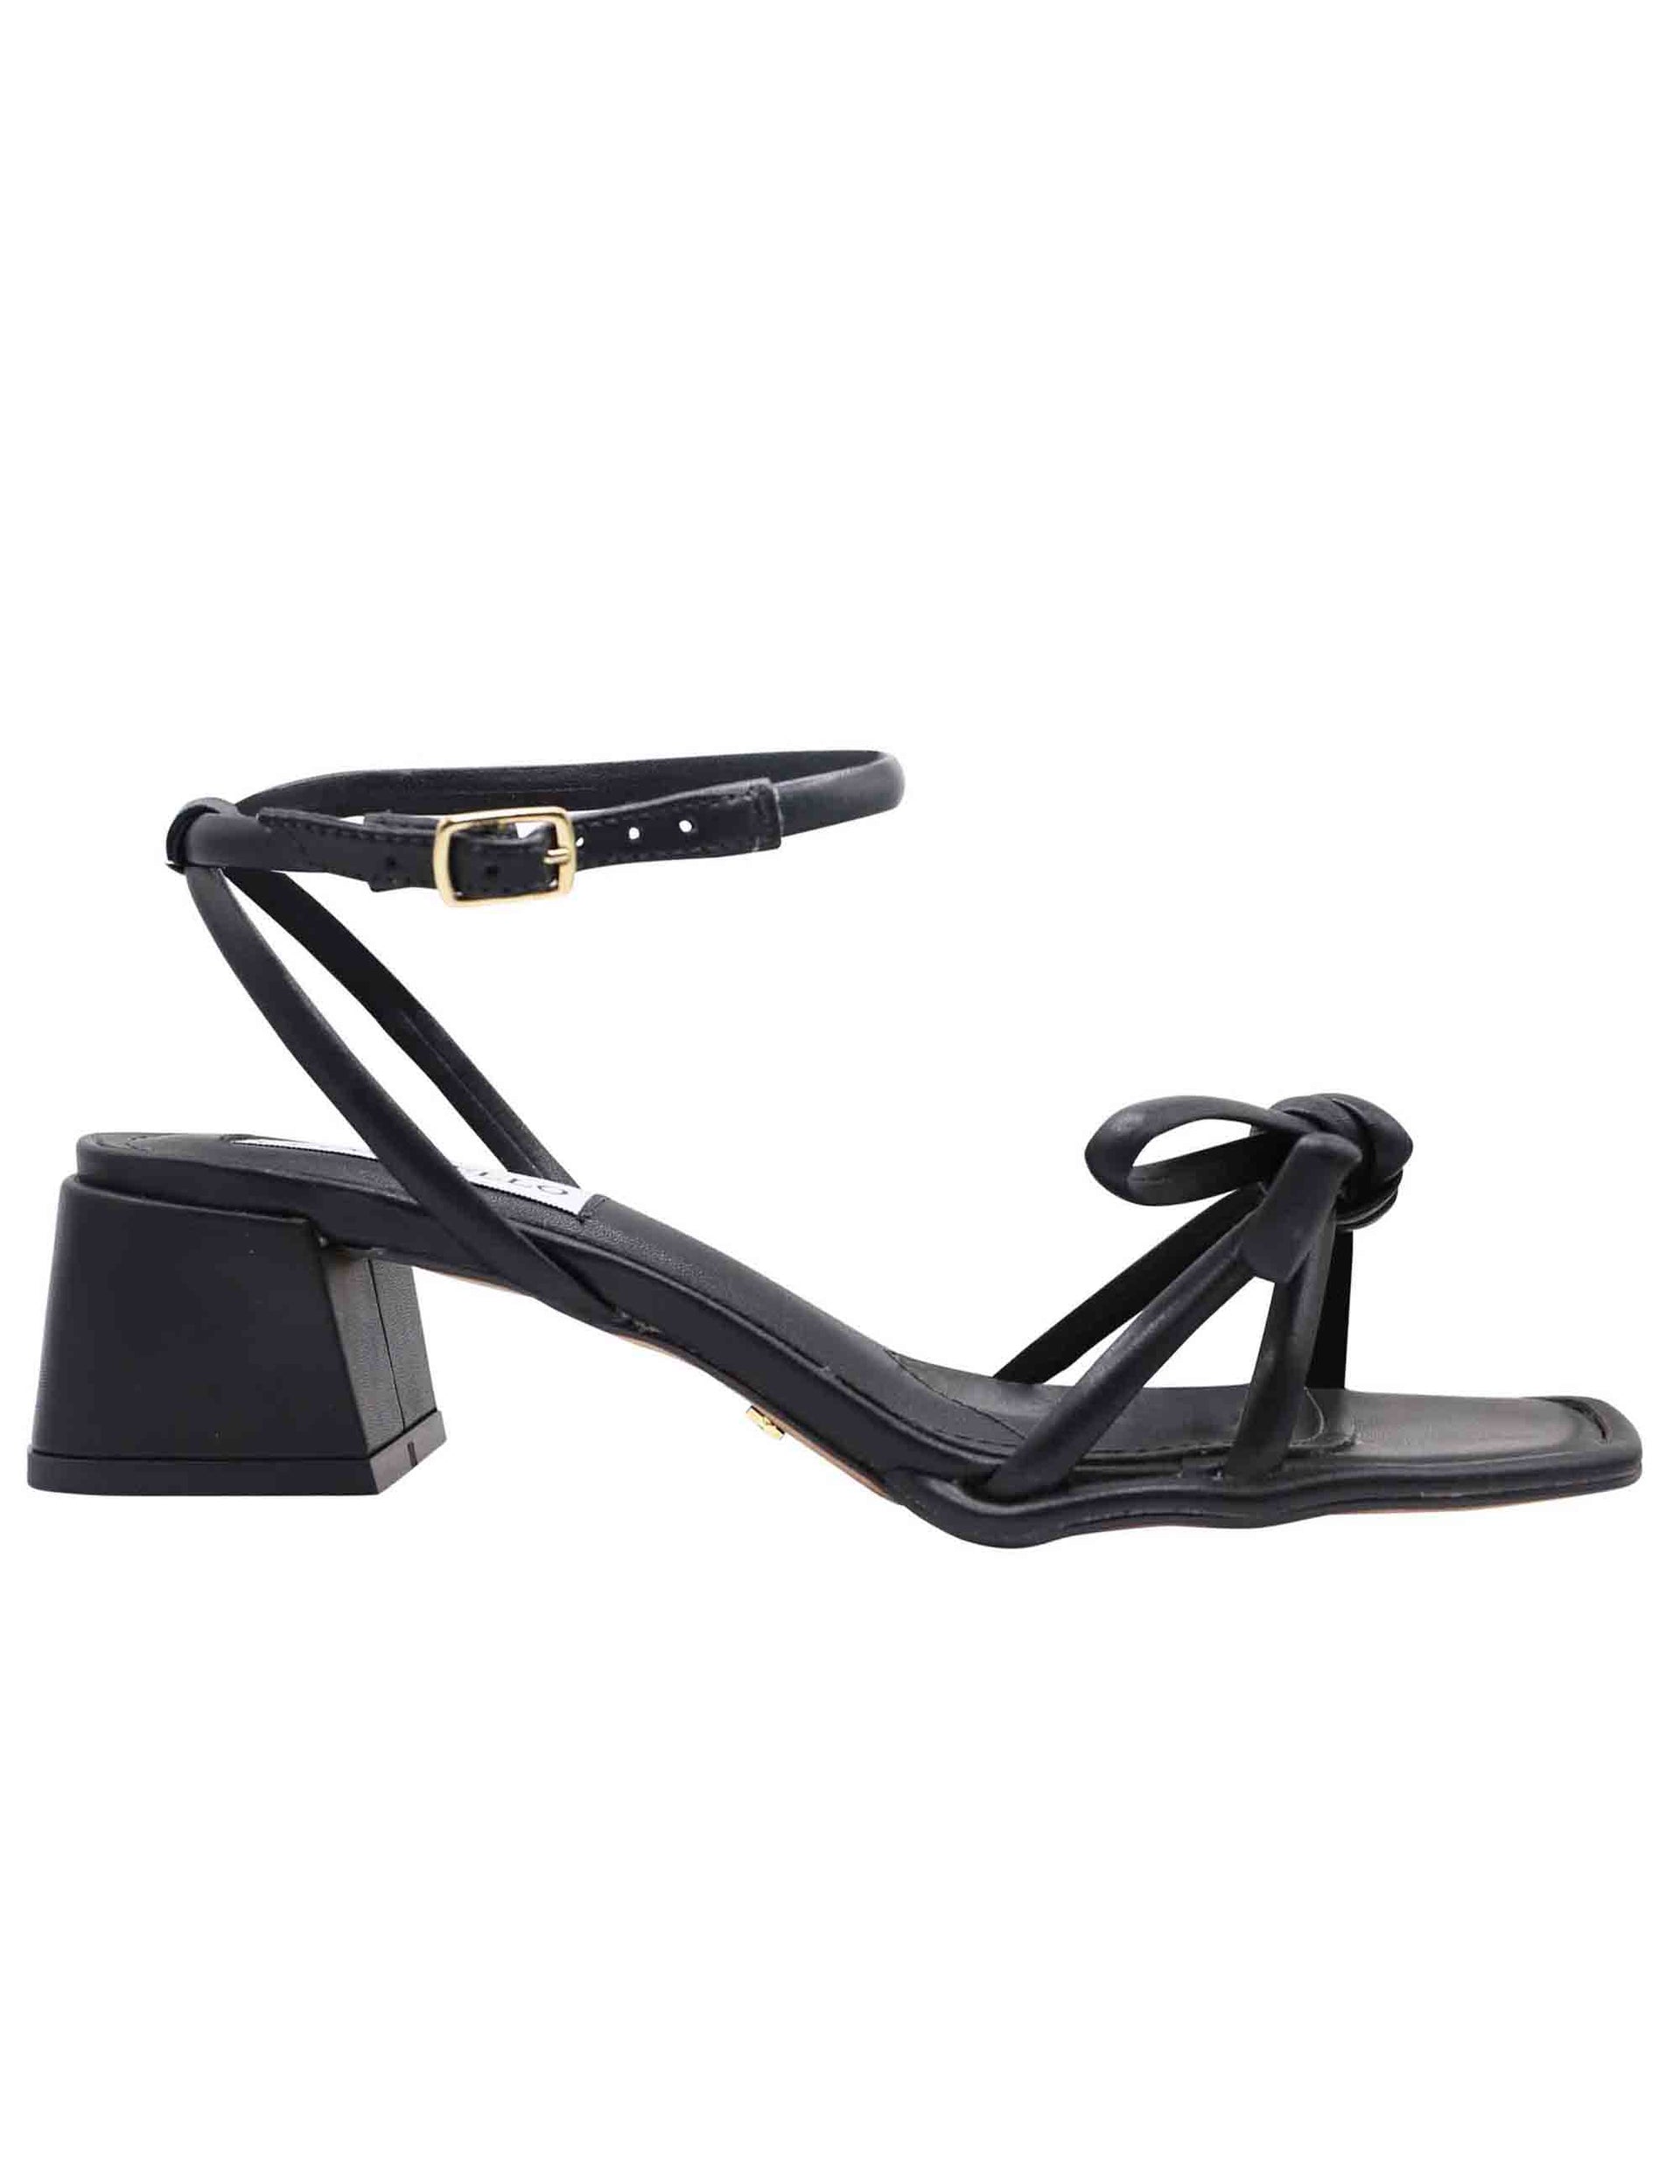 Women's black leather sandals with front bow and ankle strap